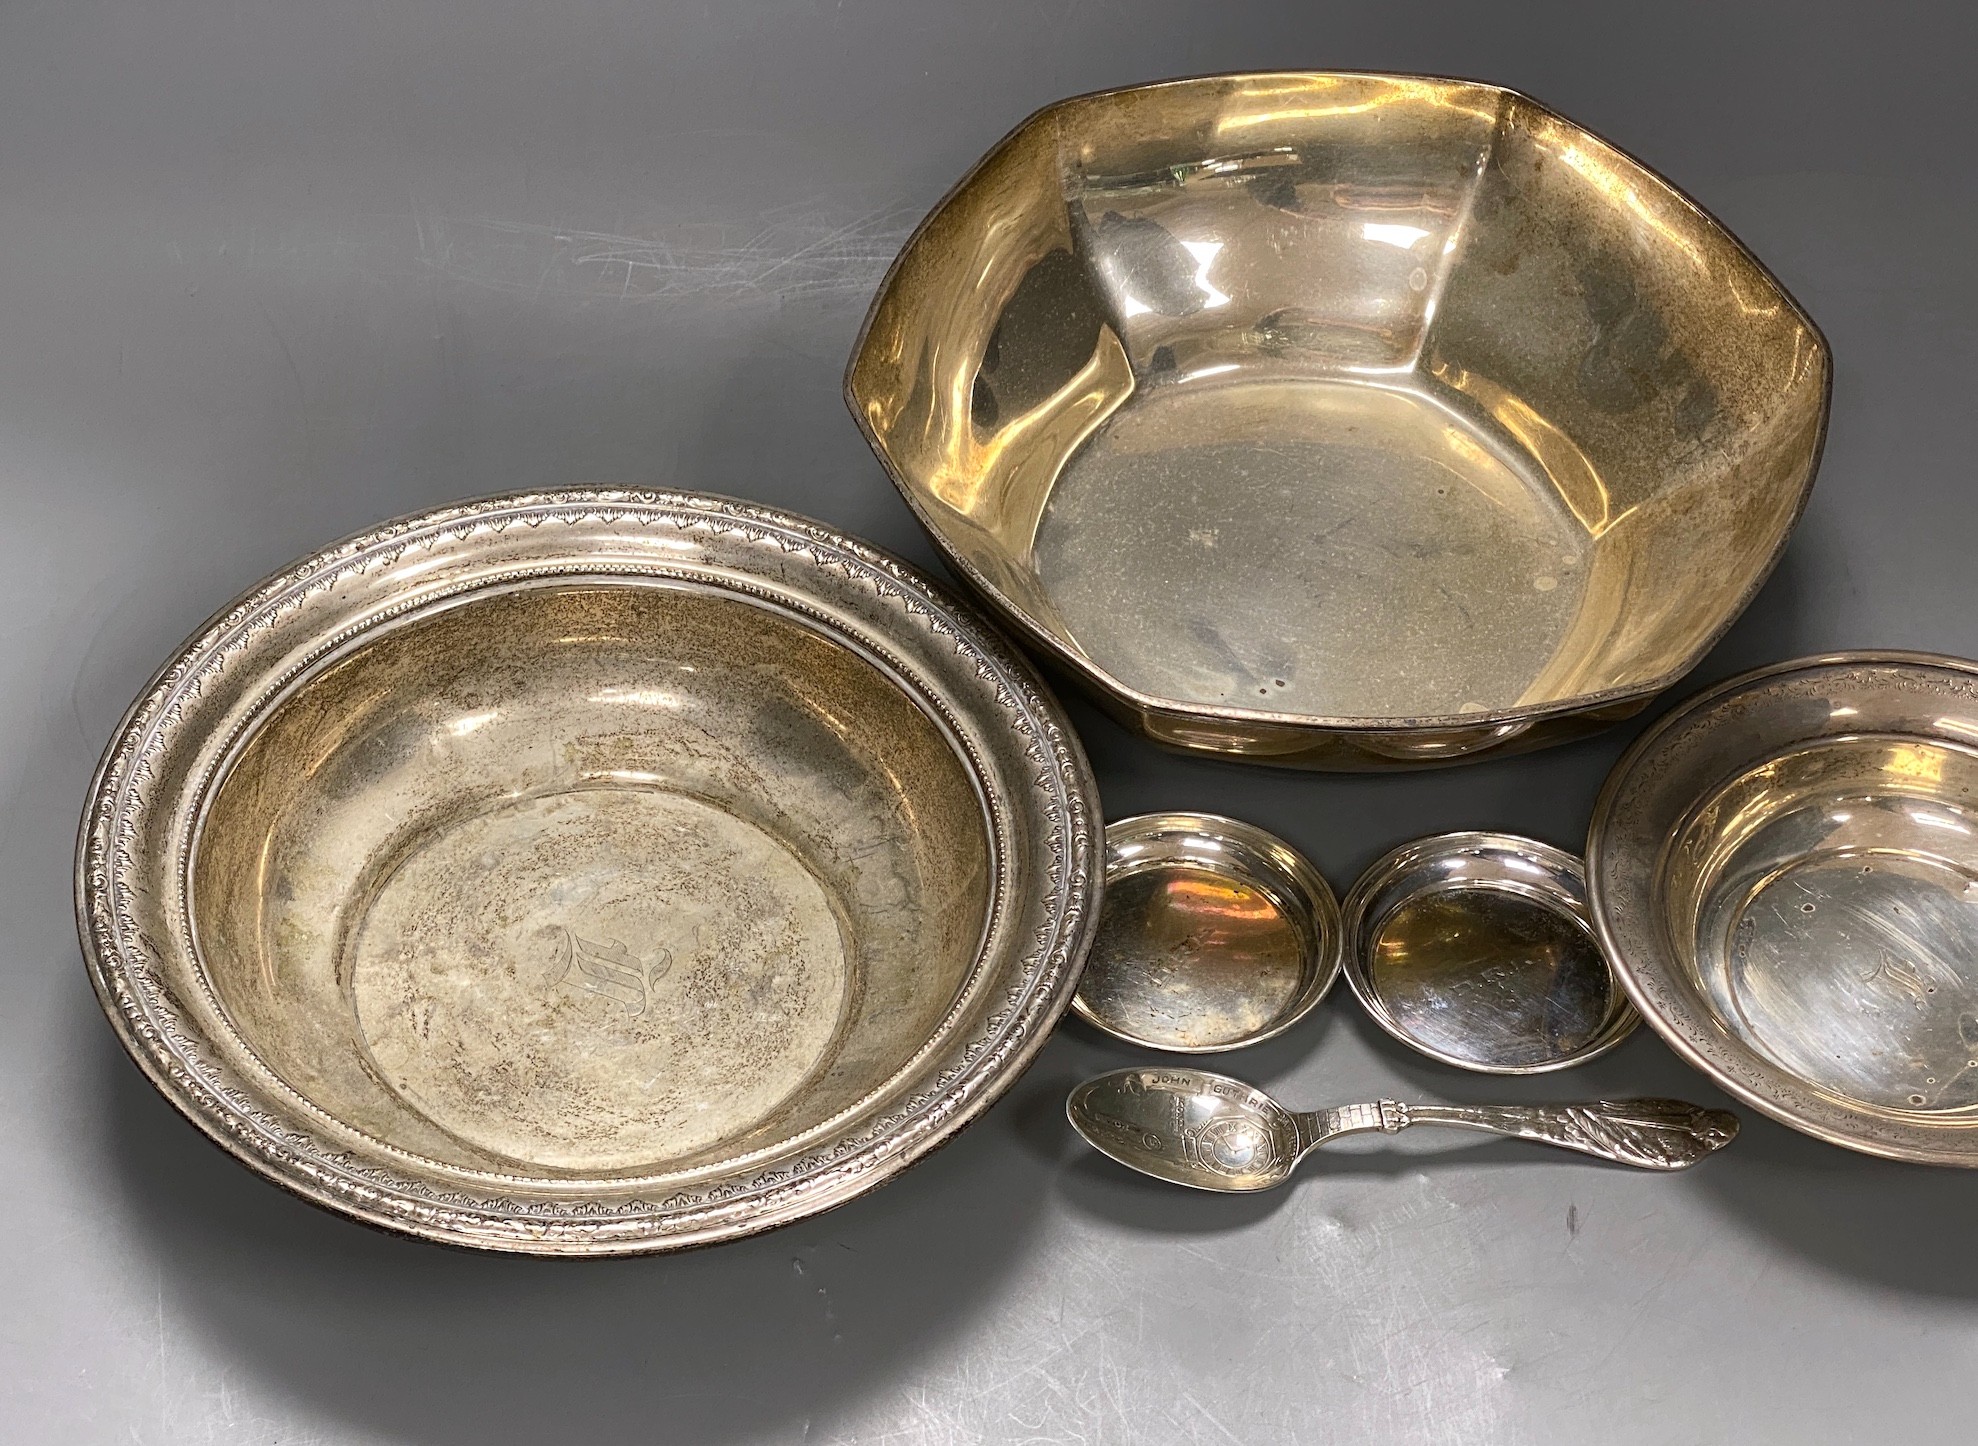 An early 20th century Tiffany & Co hexagonal sterling 925 fruit bowl, diameter 21.9cm, together with two other sterling bowls, two small sterling dishes and a sterling spoon, 29oz.